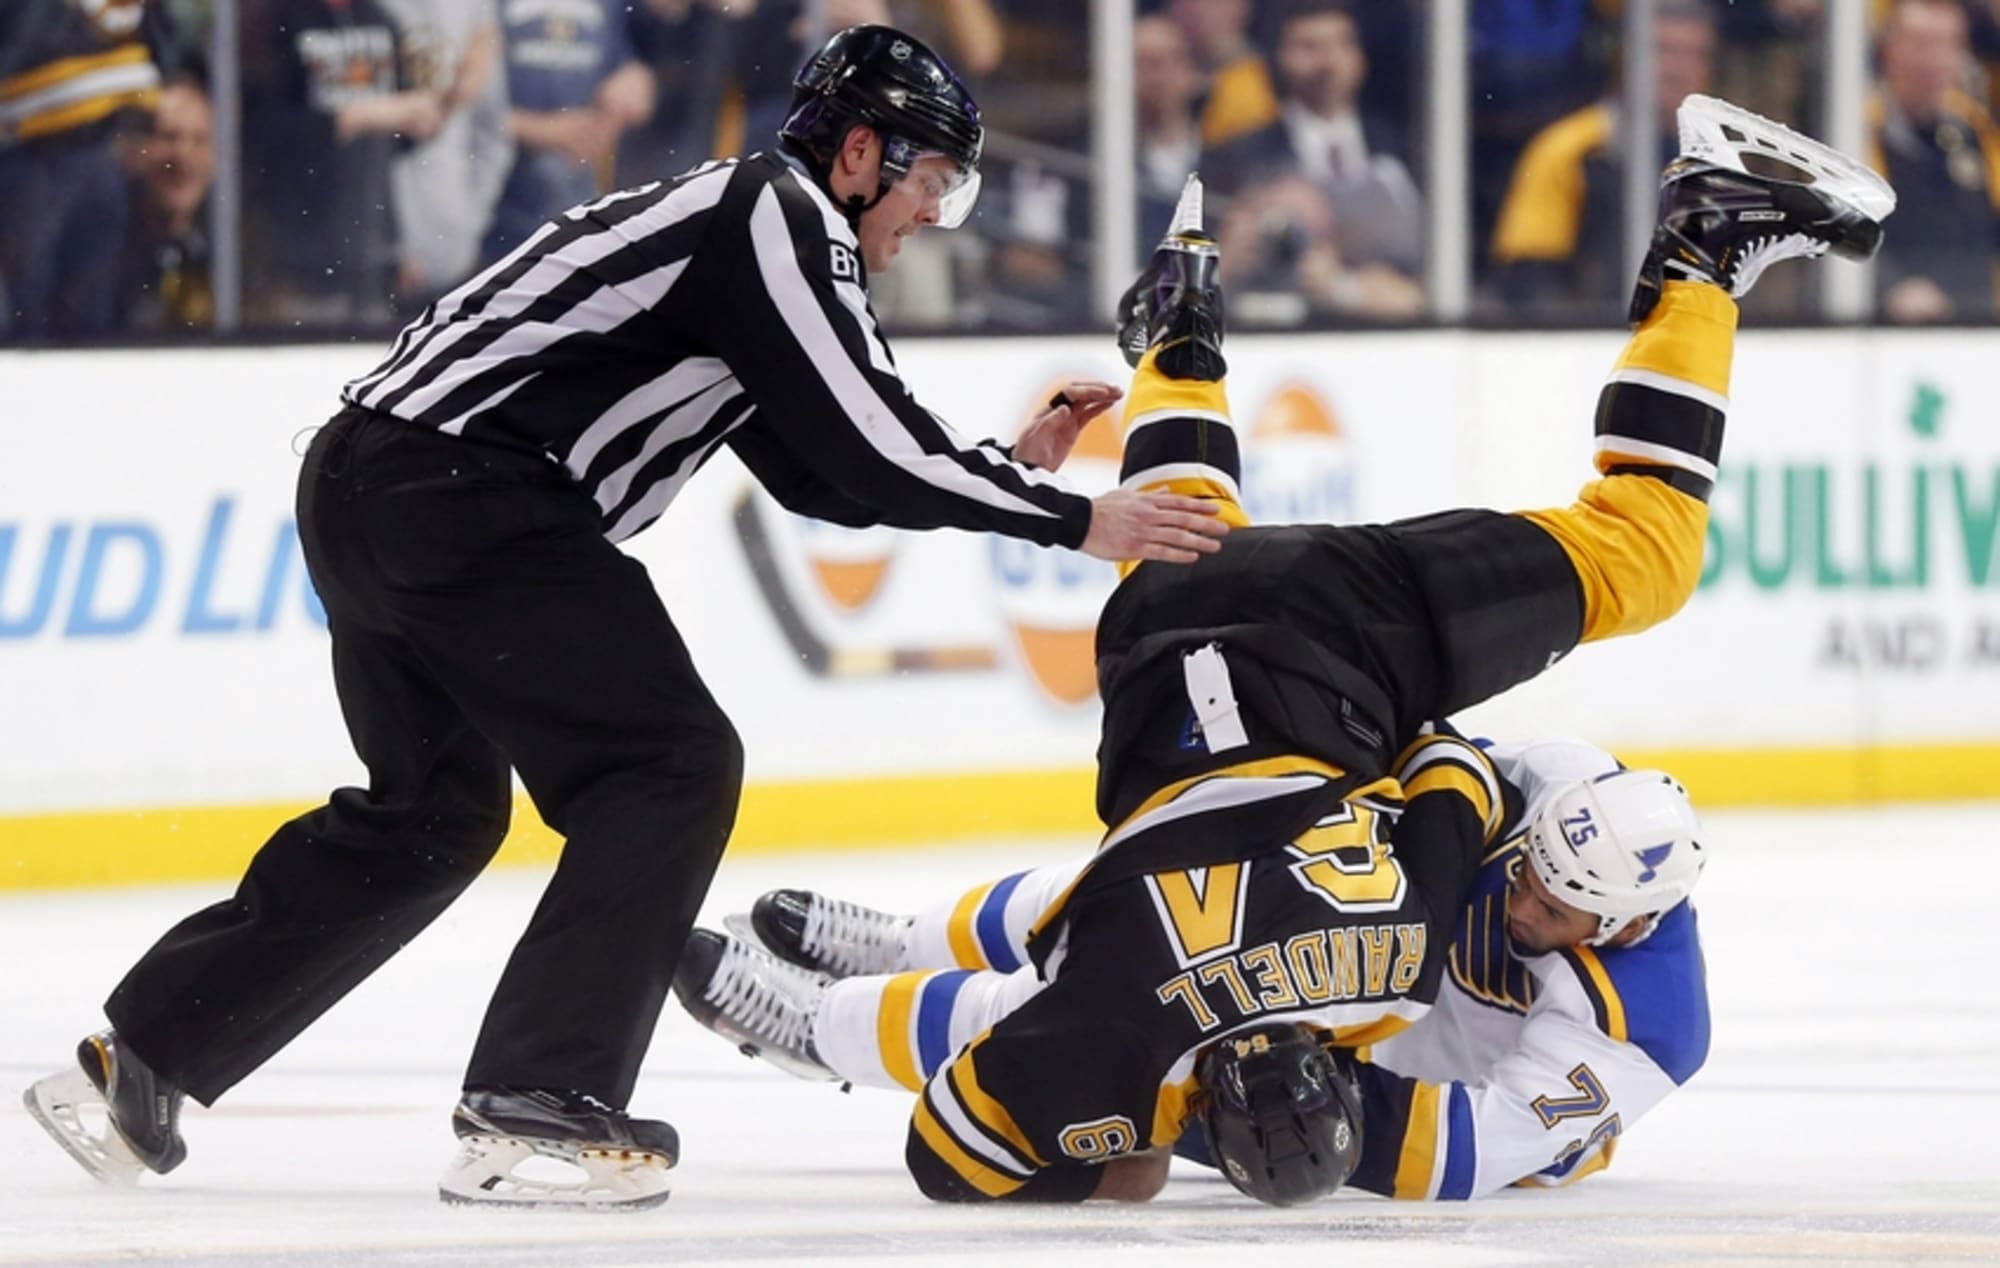 St. Louis Blues Opposition: The Boston Bruins